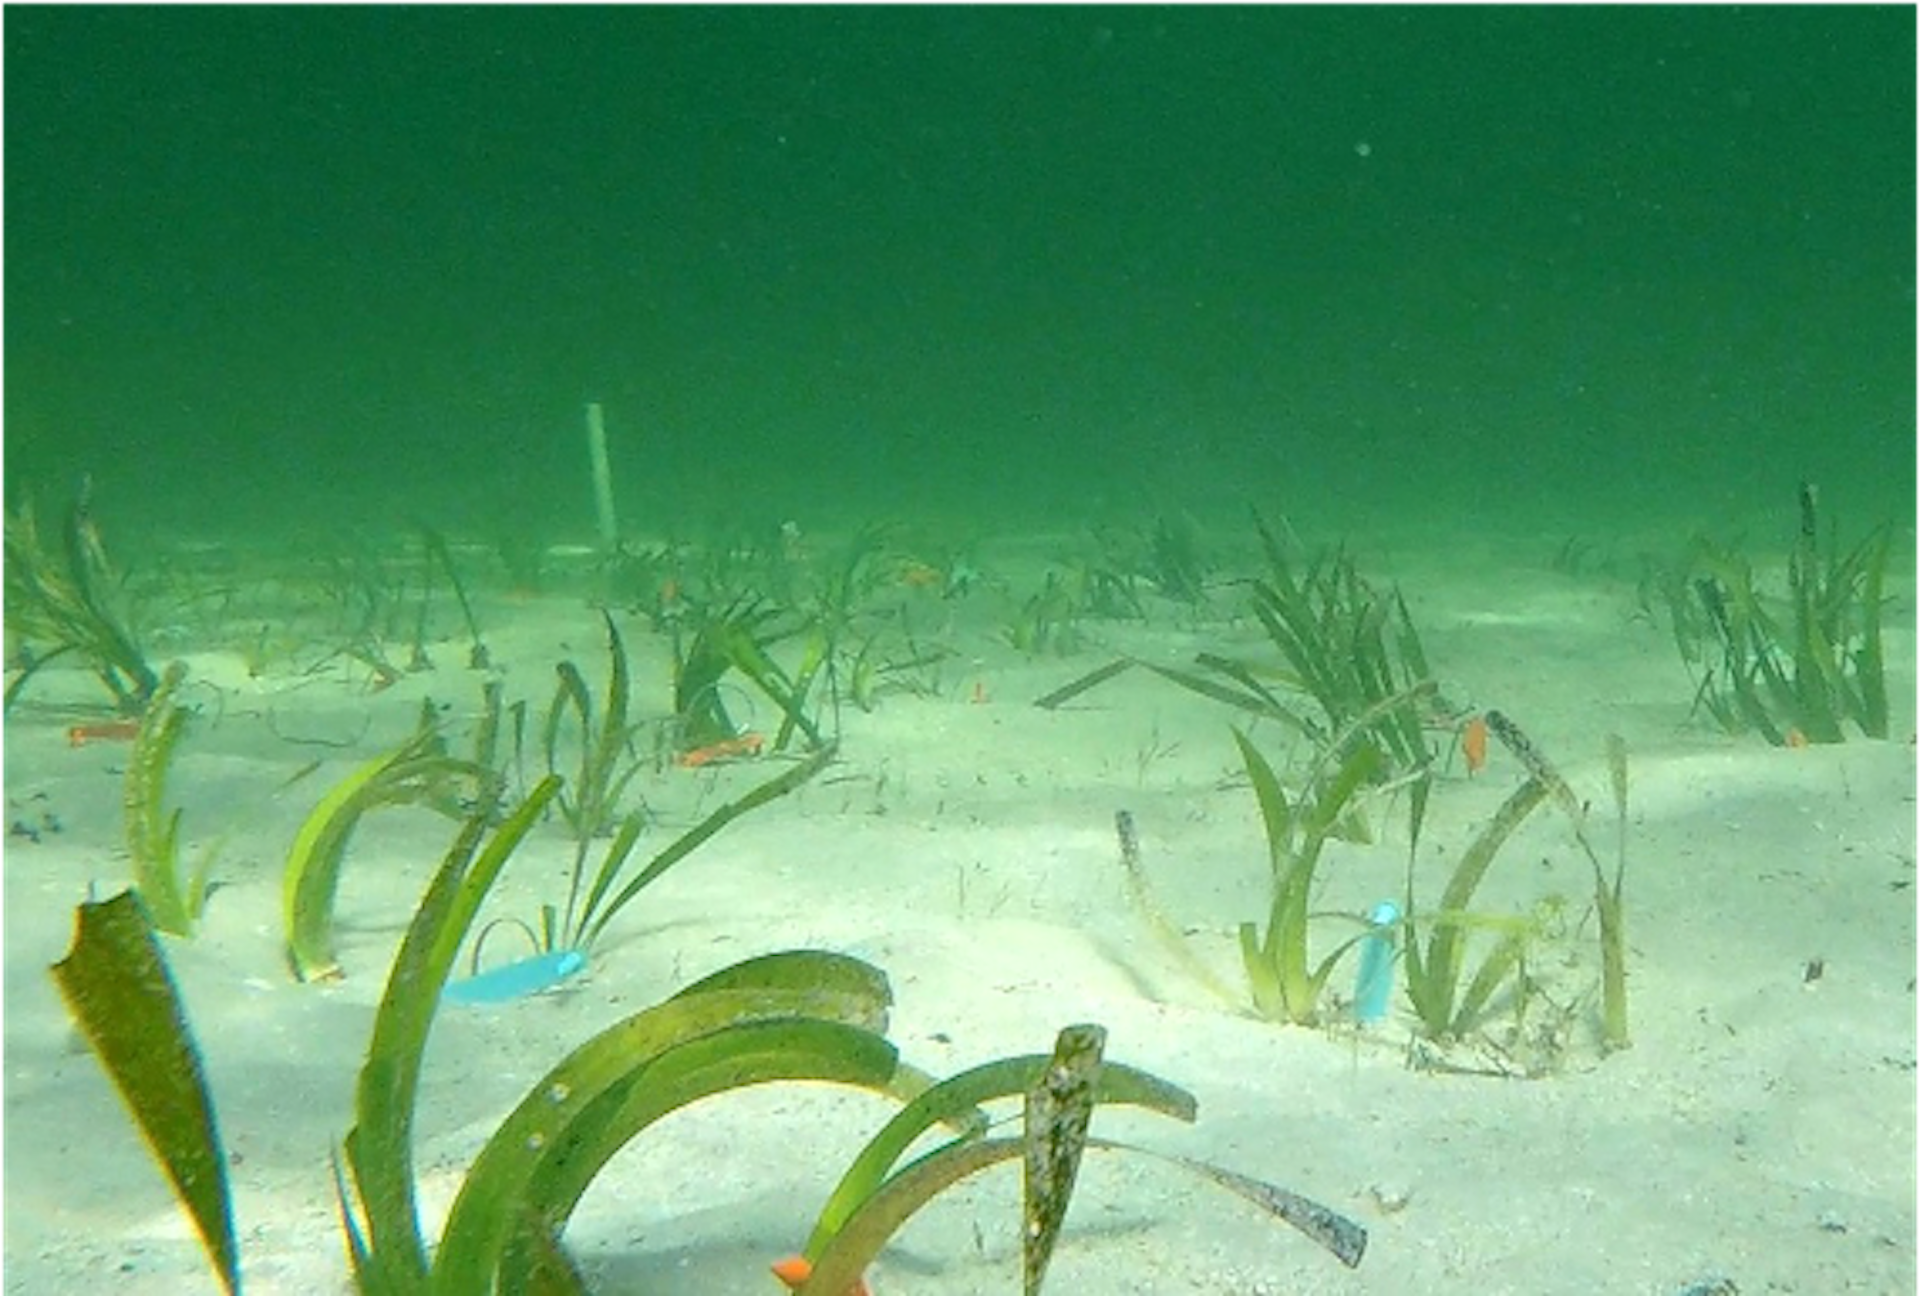 Meet the world's largest plant: a single seagrass clone stretching 180 km  in Western Australia's Shark Bay